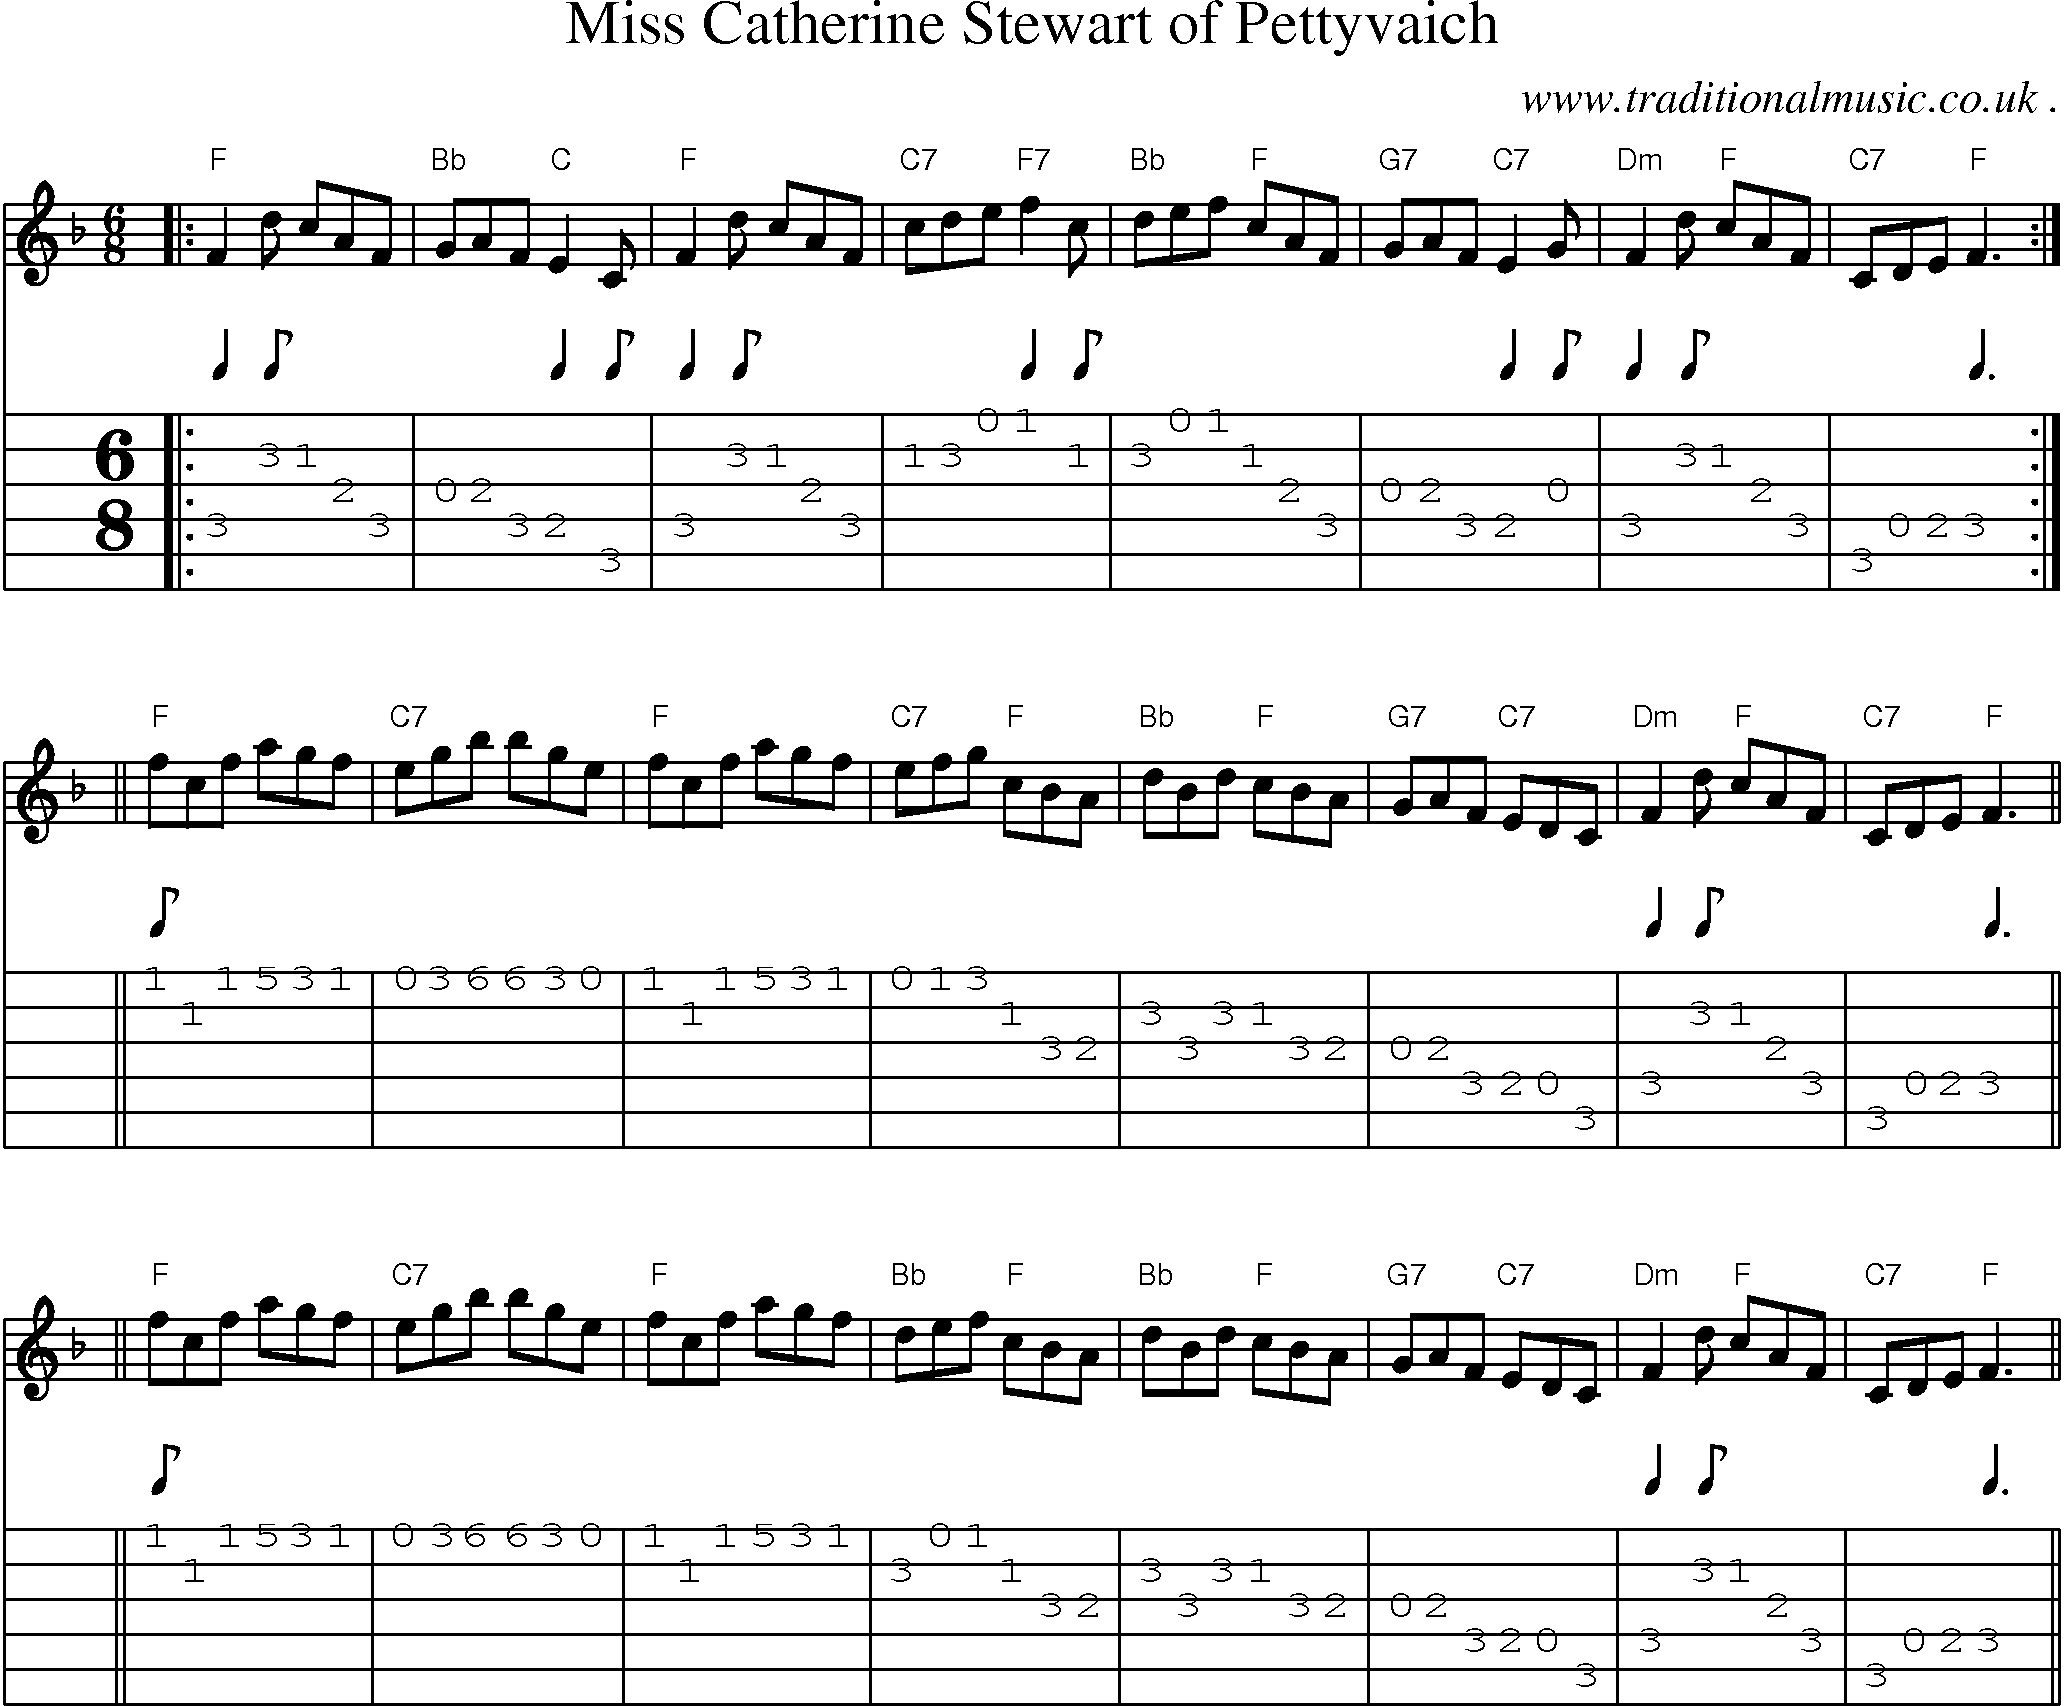 Sheet-music  score, Chords and Guitar Tabs for Miss Catherine Stewart Of Pettyvaich